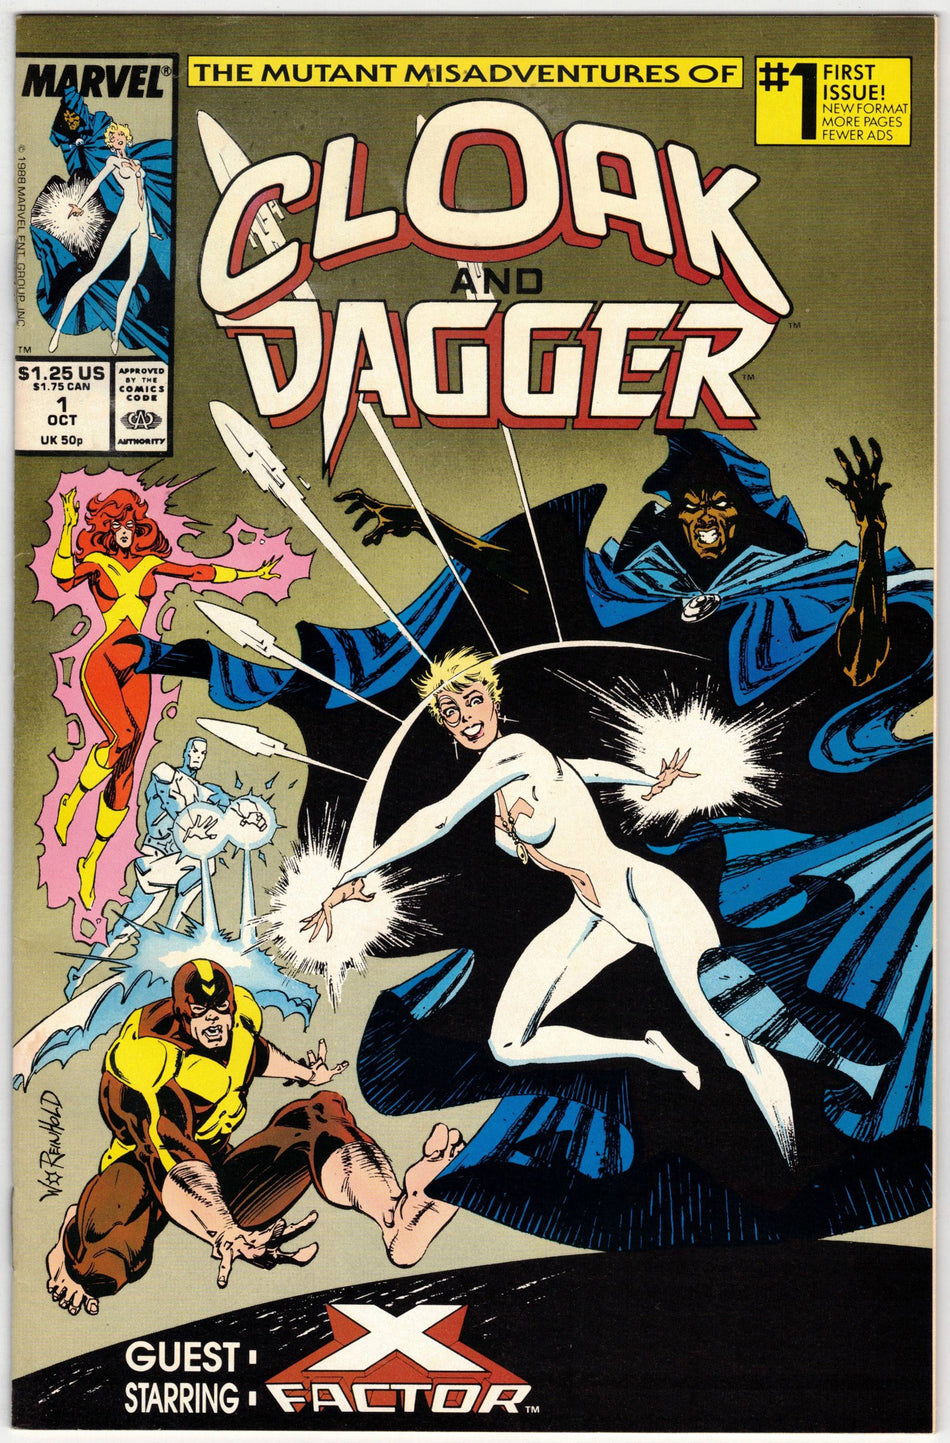 Photo of Mutant Misadventures of Cloak and Dagger (1988) Issue 1 - Very Good Comic sold by Stronghold Collectibles